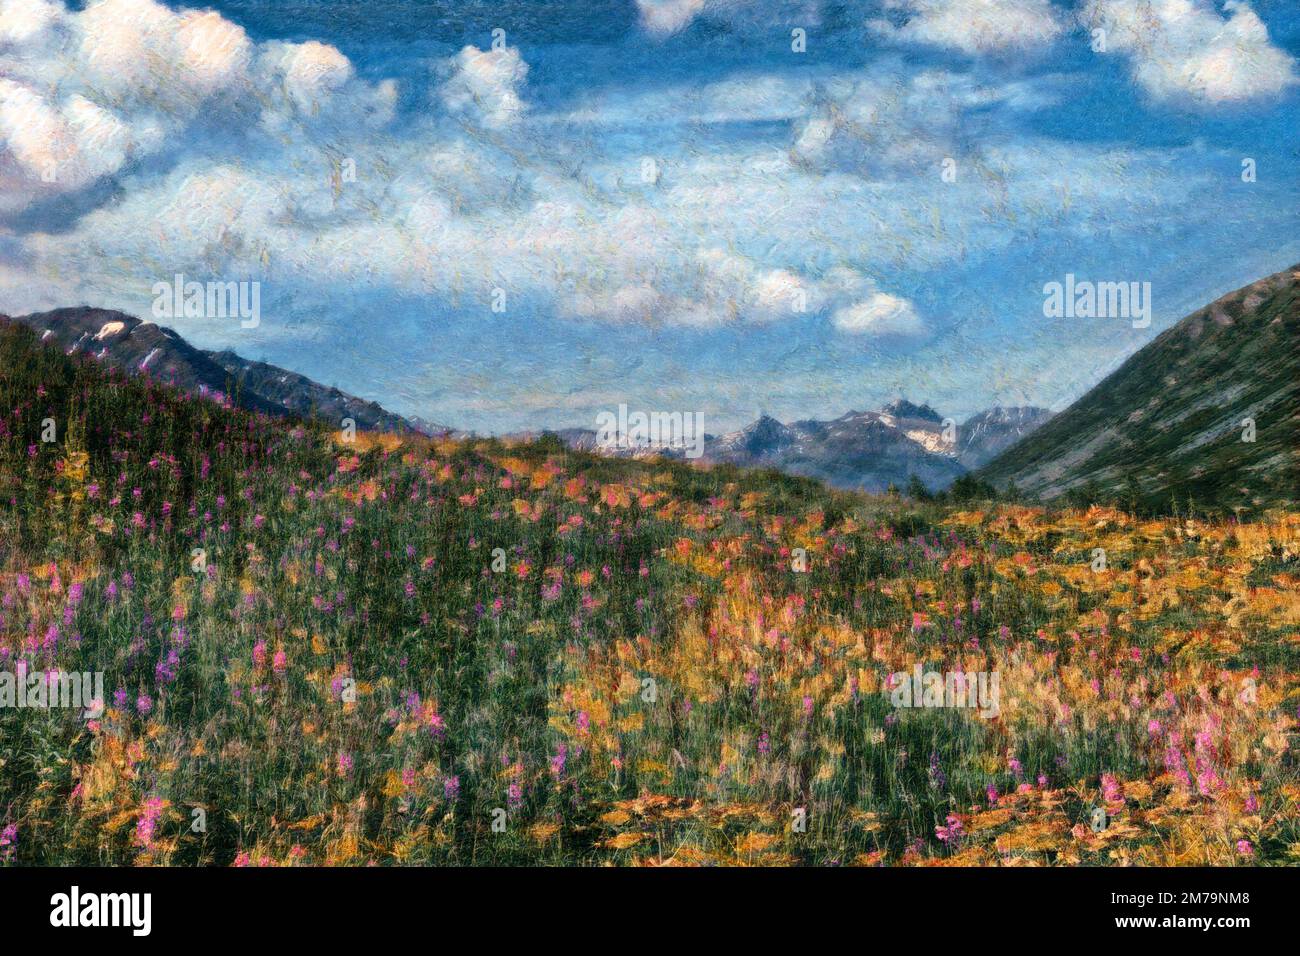 Digital watercolor painting effect on photo of Alaska fireweed flowers in meadow with snowcapped mountains and blue sky in background Stock Photo